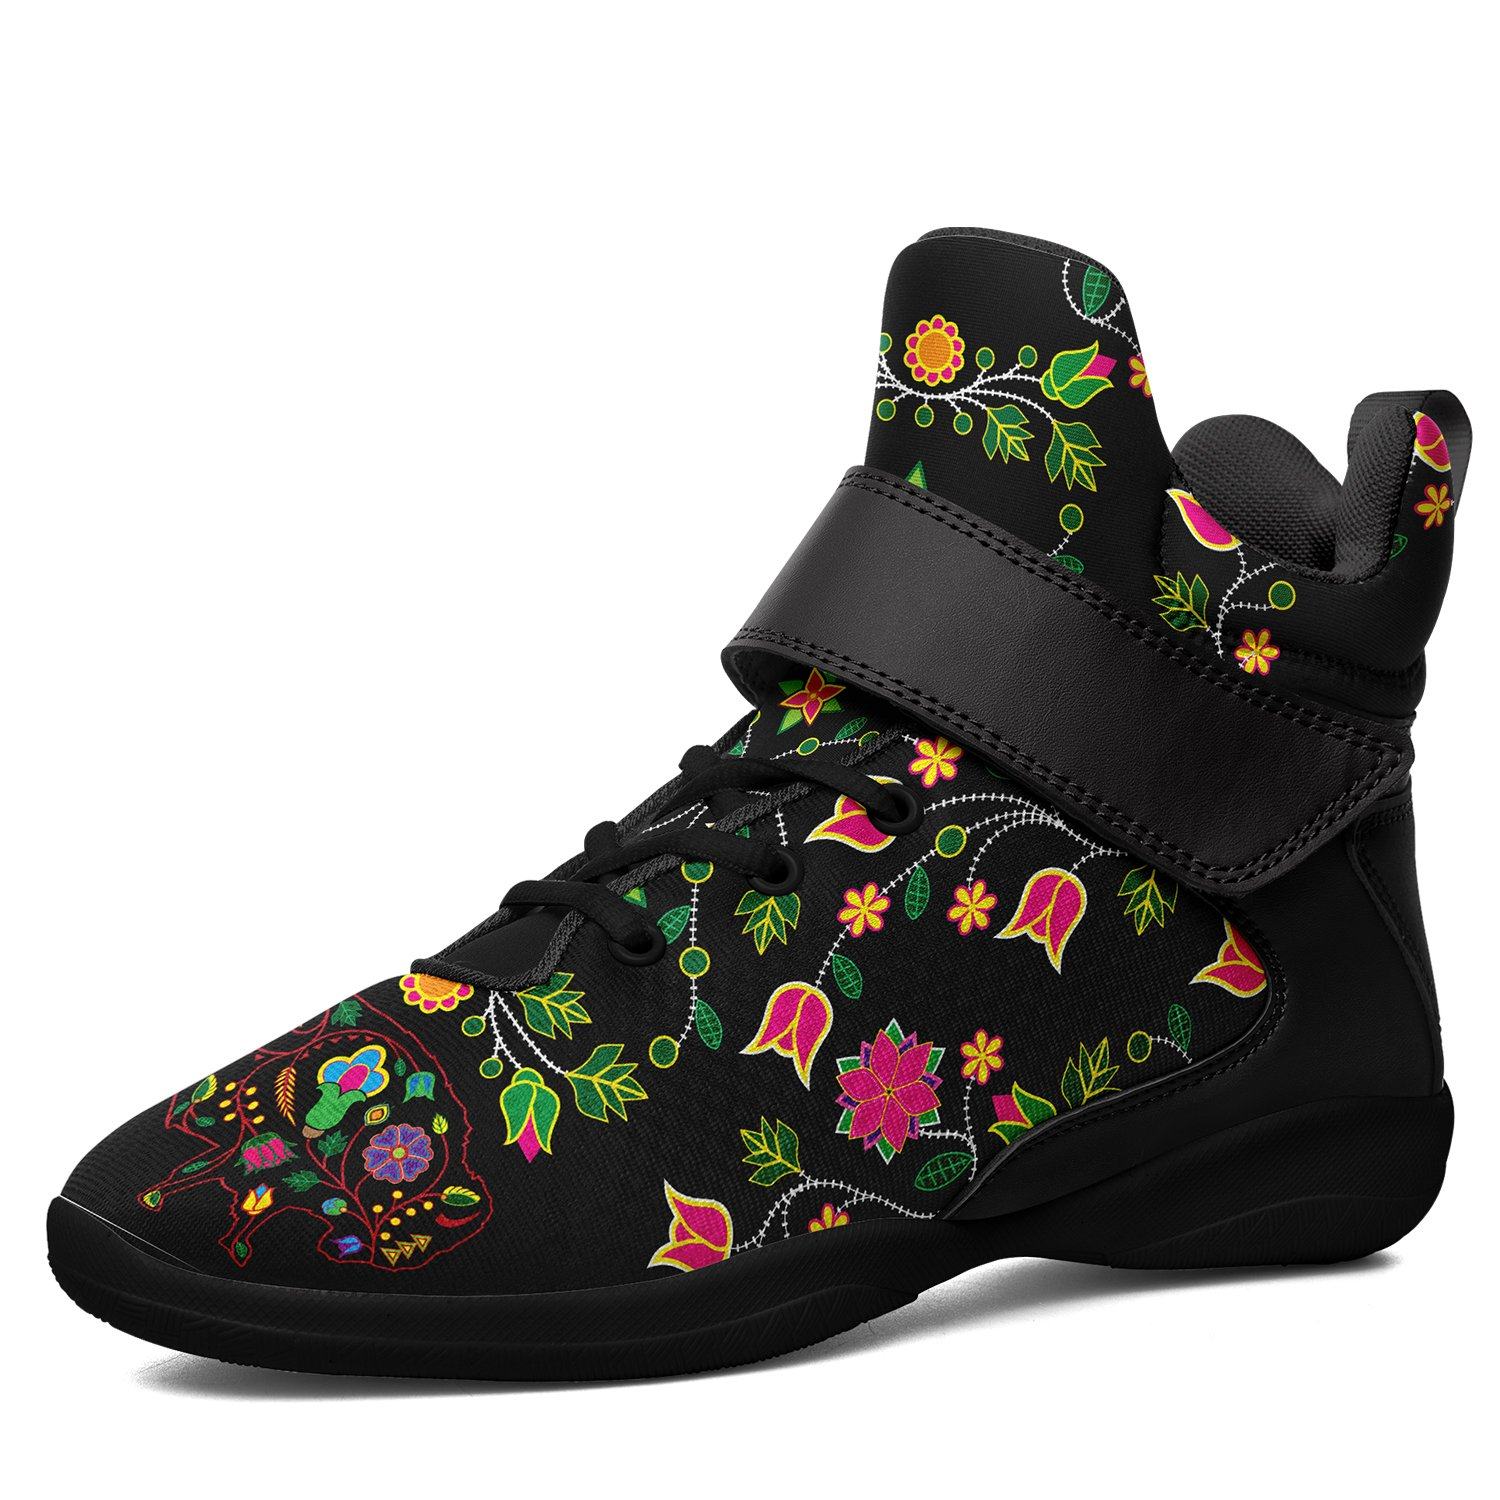 Floral Buffalo Ipottaa Basketball / Sport High Top Shoes ipottaa Herman US Women 9.5/ EUR 41 Black Sole with Black Strap 